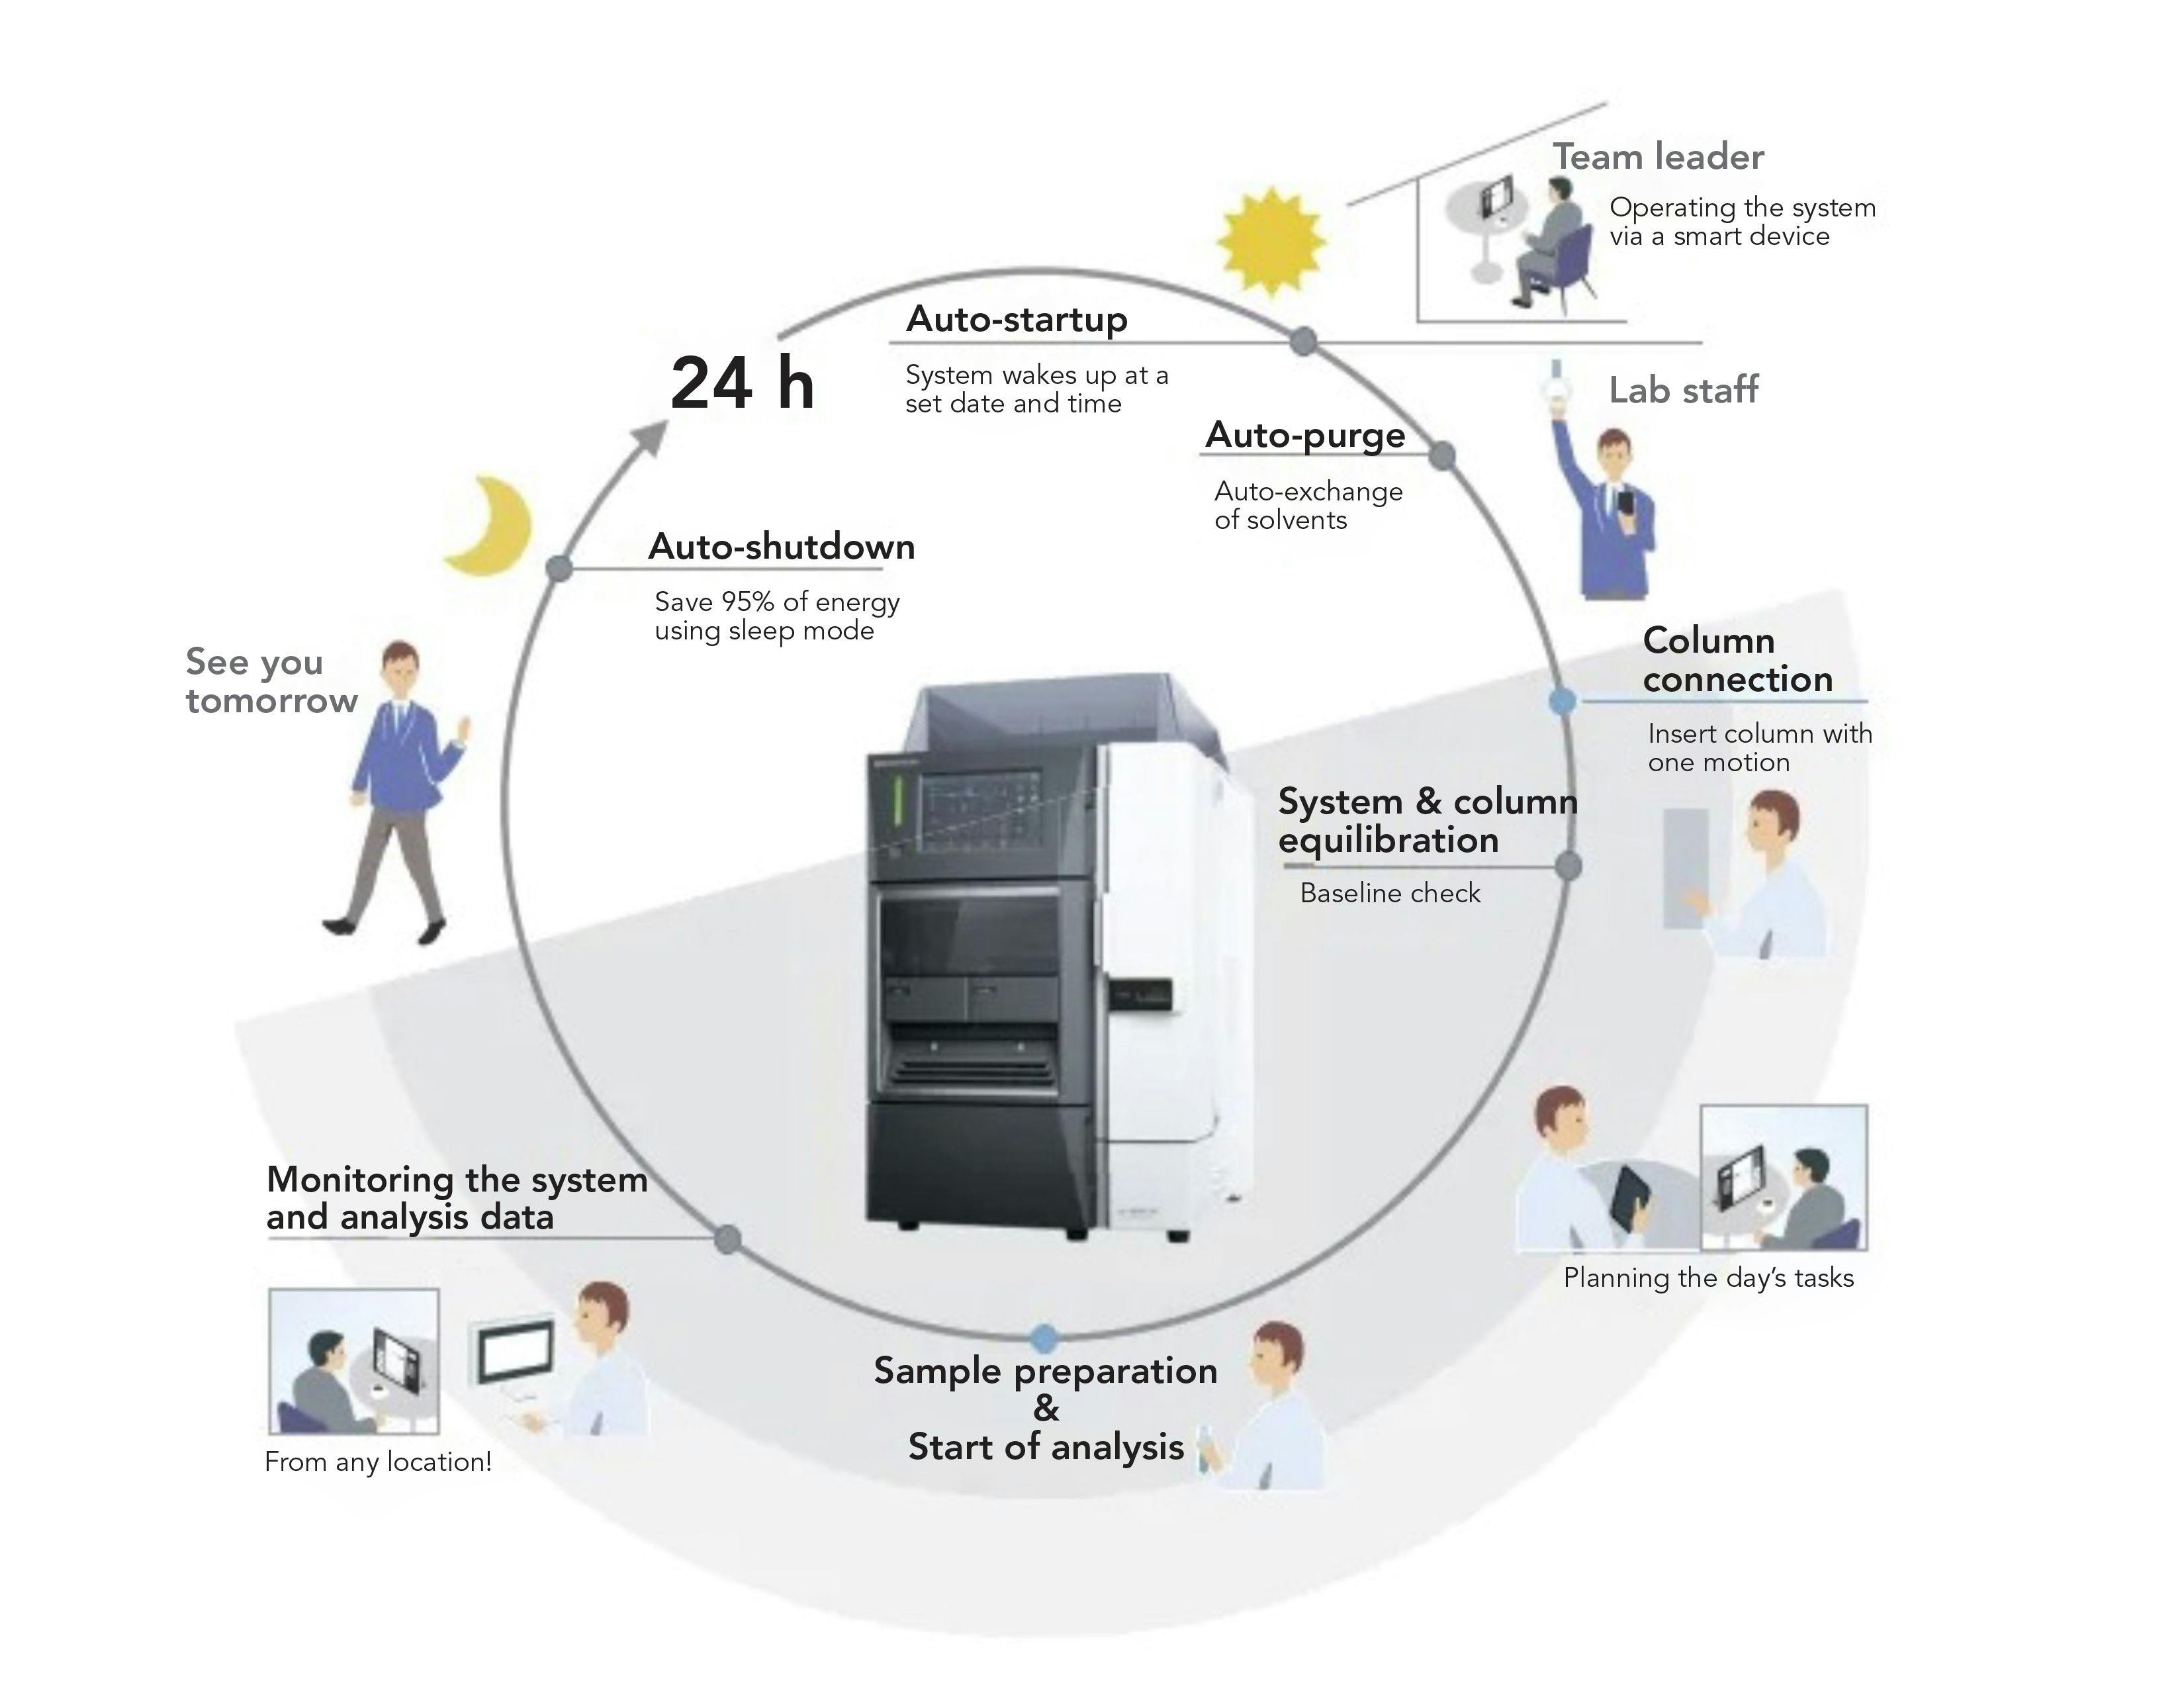 FIGURE 2: Graphics illustrating the automated workflows of the Shimadzu LC-2030C NT.